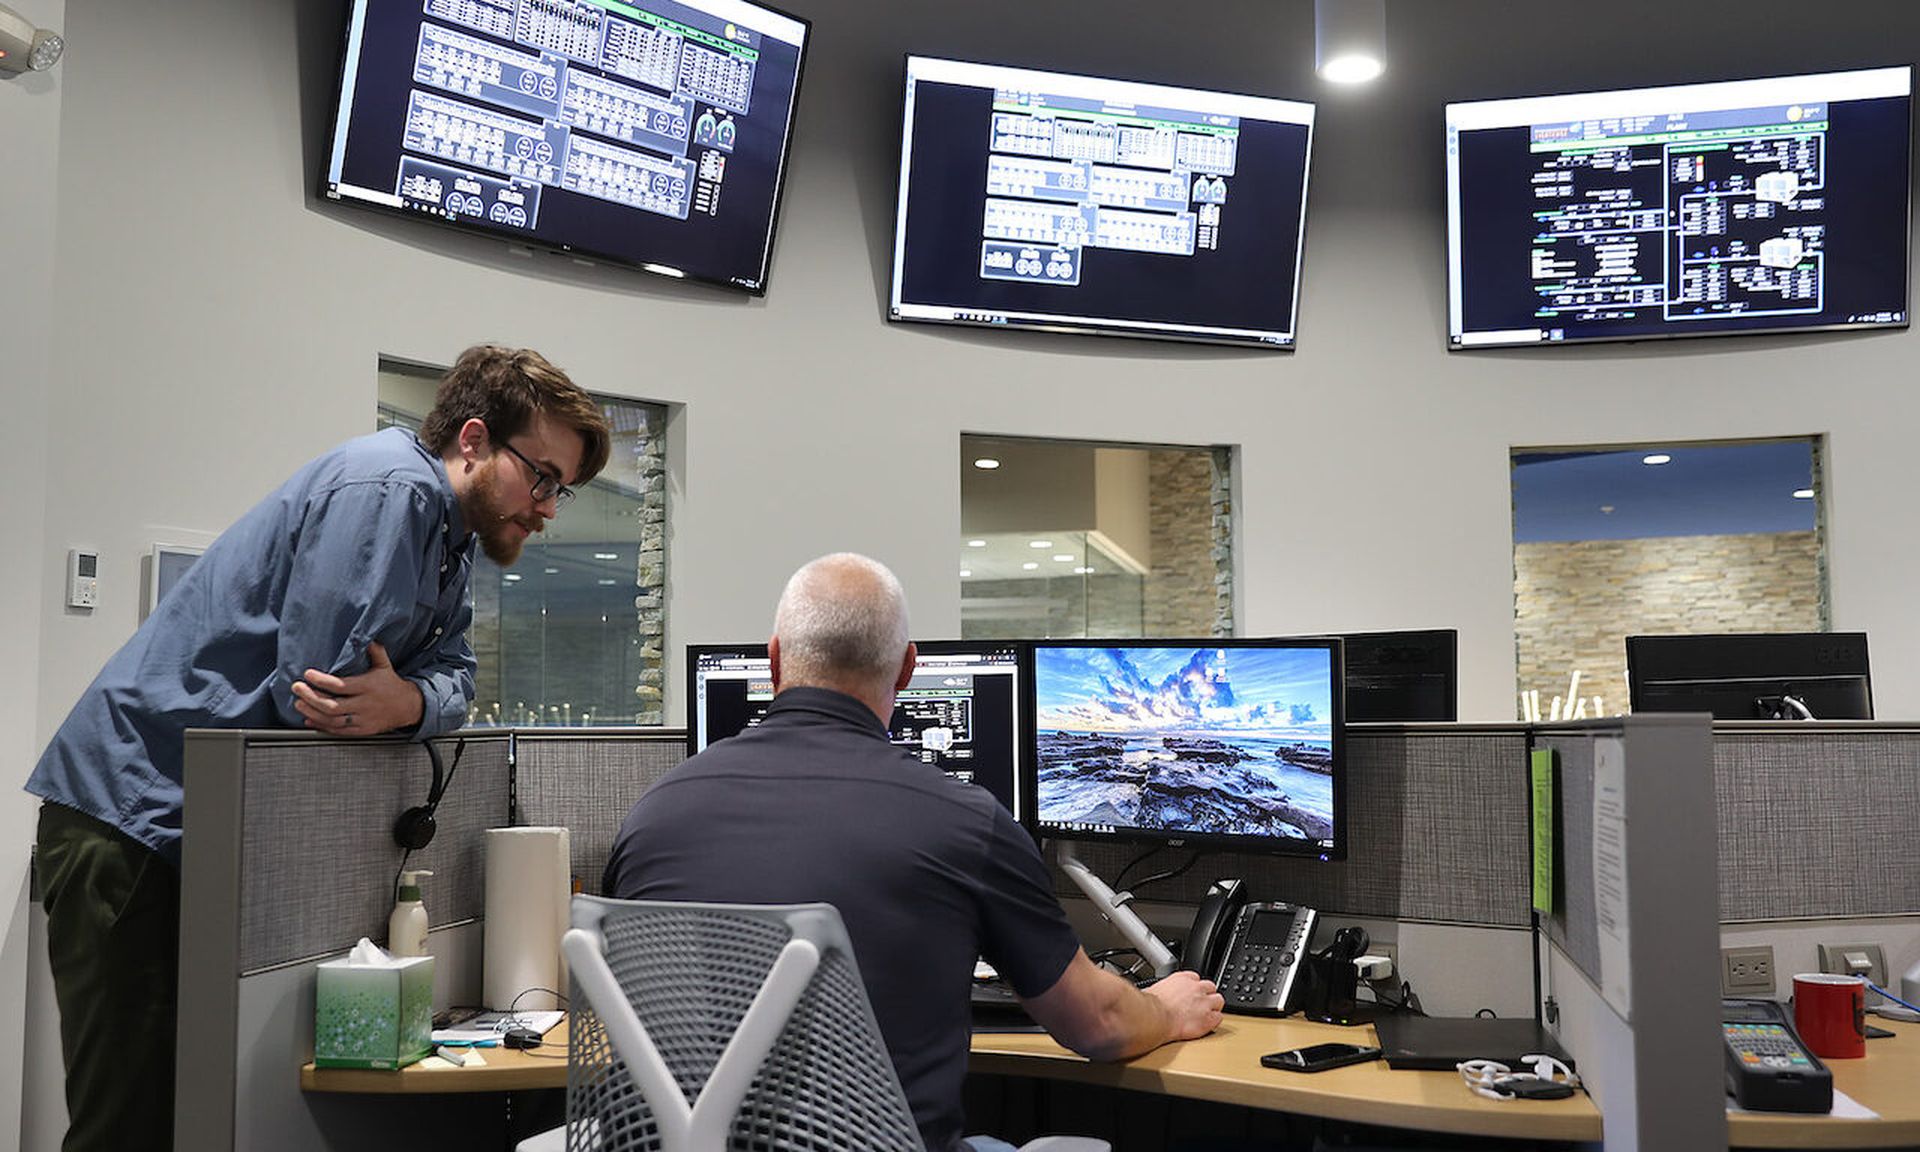 Individuals work at a network operations center at the LightEdge Solutions company on October 15, 2019 in Altoona, Iowa. A new tool from Palo Alto released a tool to help analysts working in security operations center focus on high priority efforts. (Photo by Joe Raedle/Getty Images)